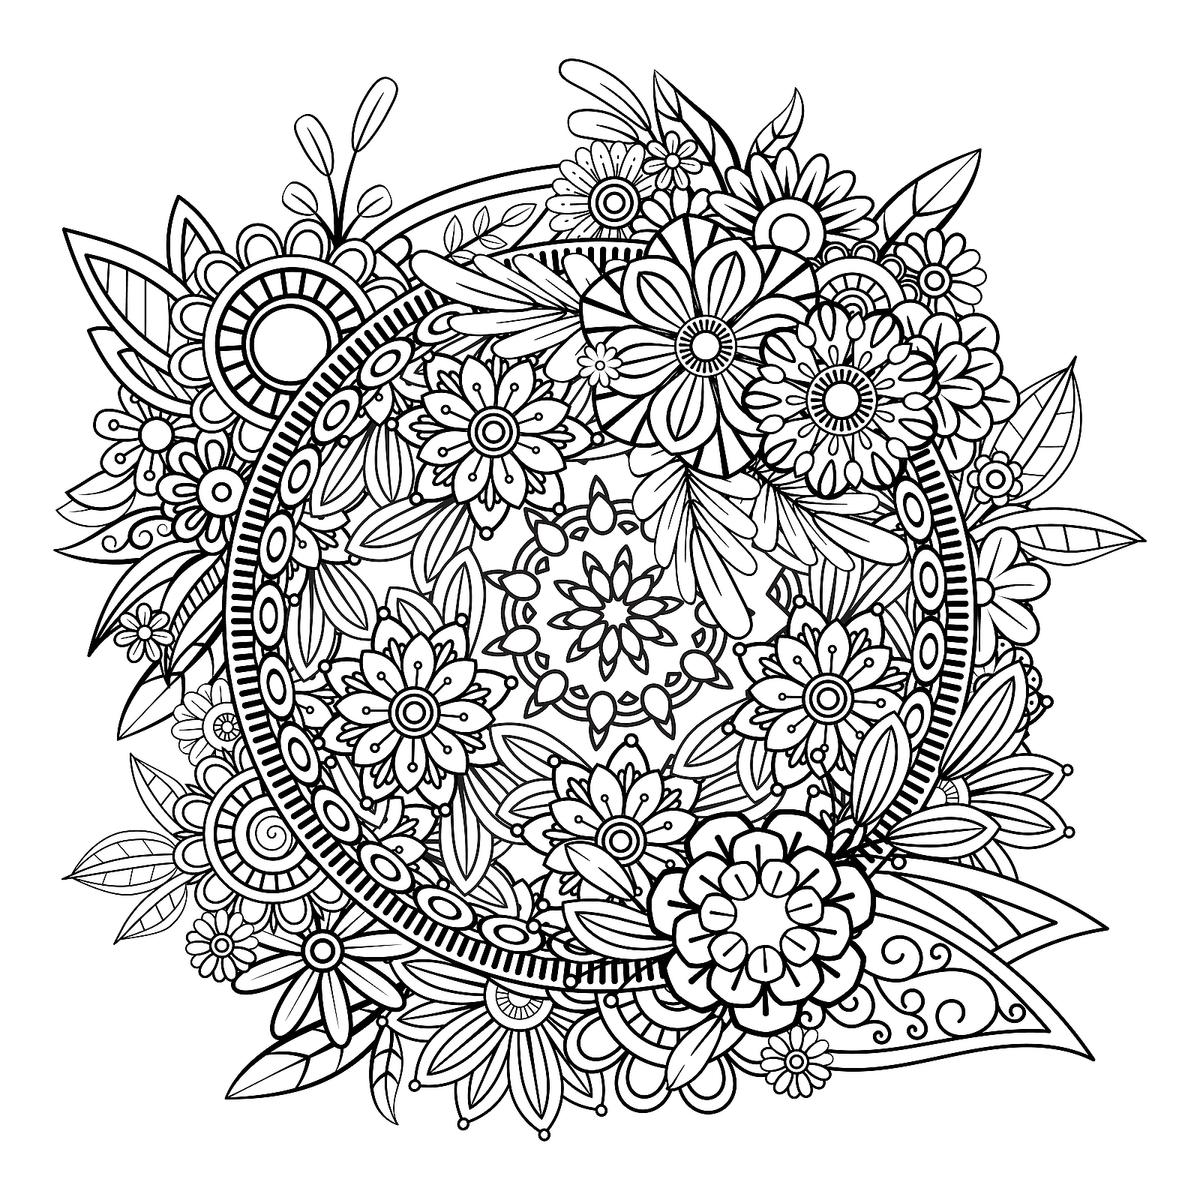 Mandala coloring pages free printable coloring pages of mandalas for adults kids printables mom